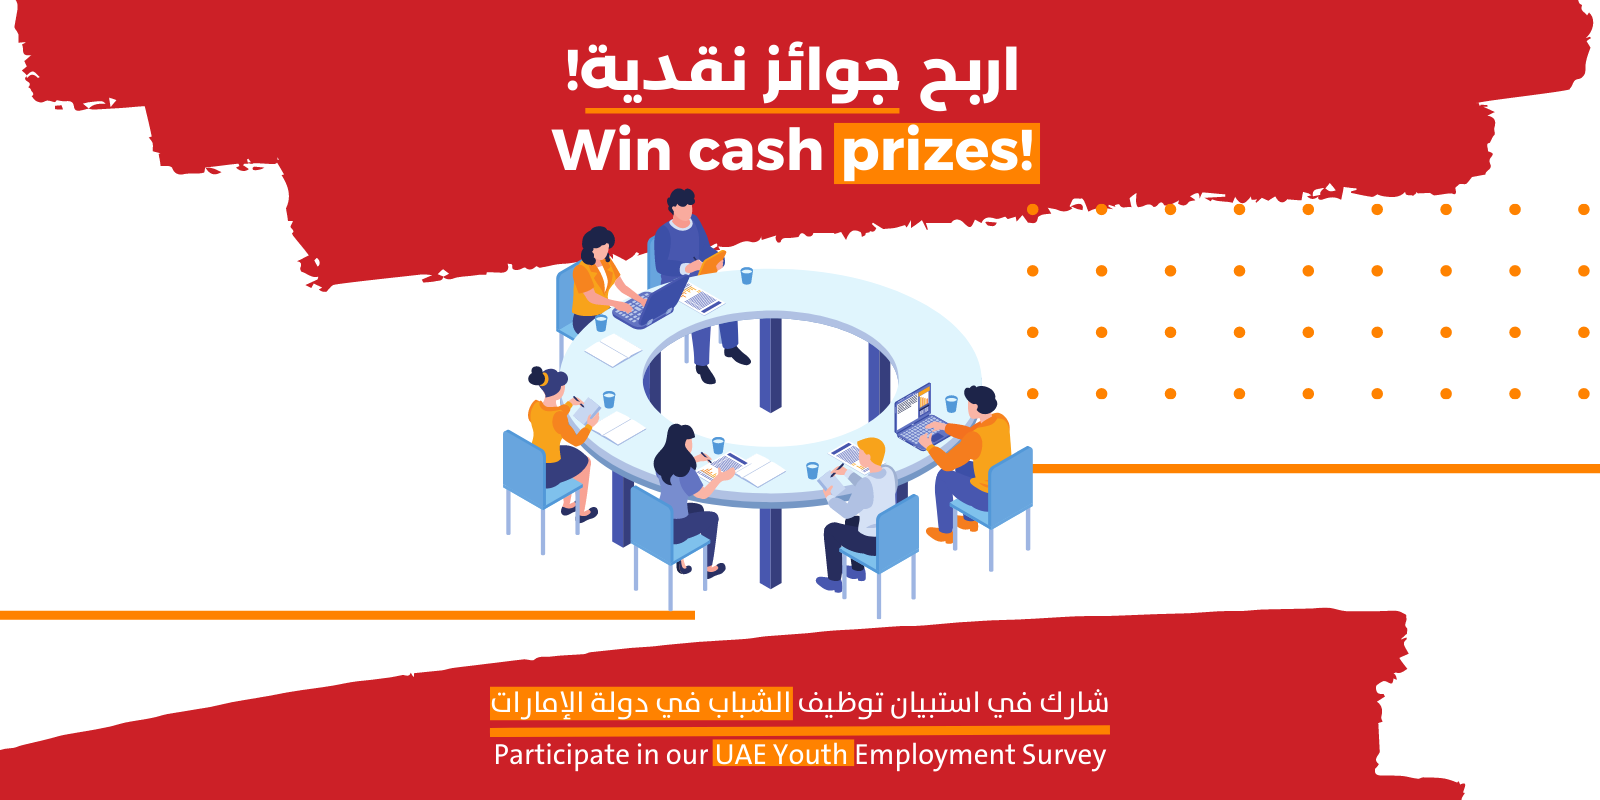 Win cash prizes! Participate in our UAE Youth Employment Survey (1600 × 1080 px) (1)